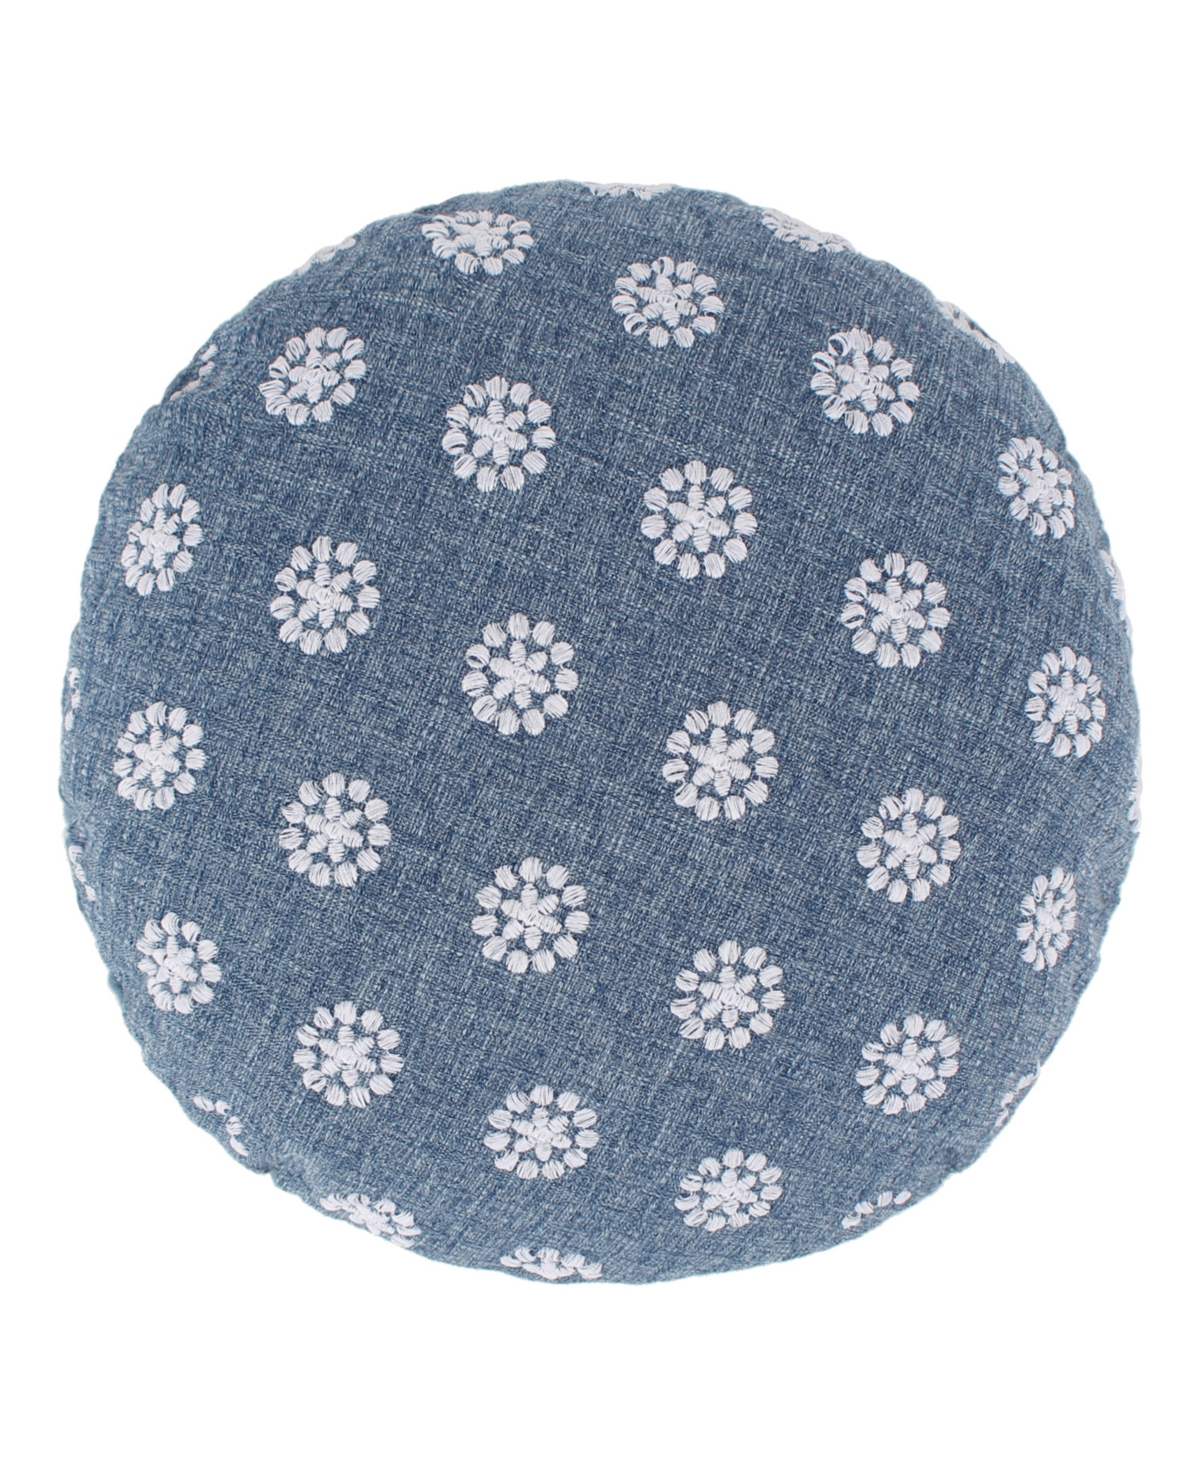 Levtex Wexford Embroidered Decorative Pillow, 16" Round In Gray